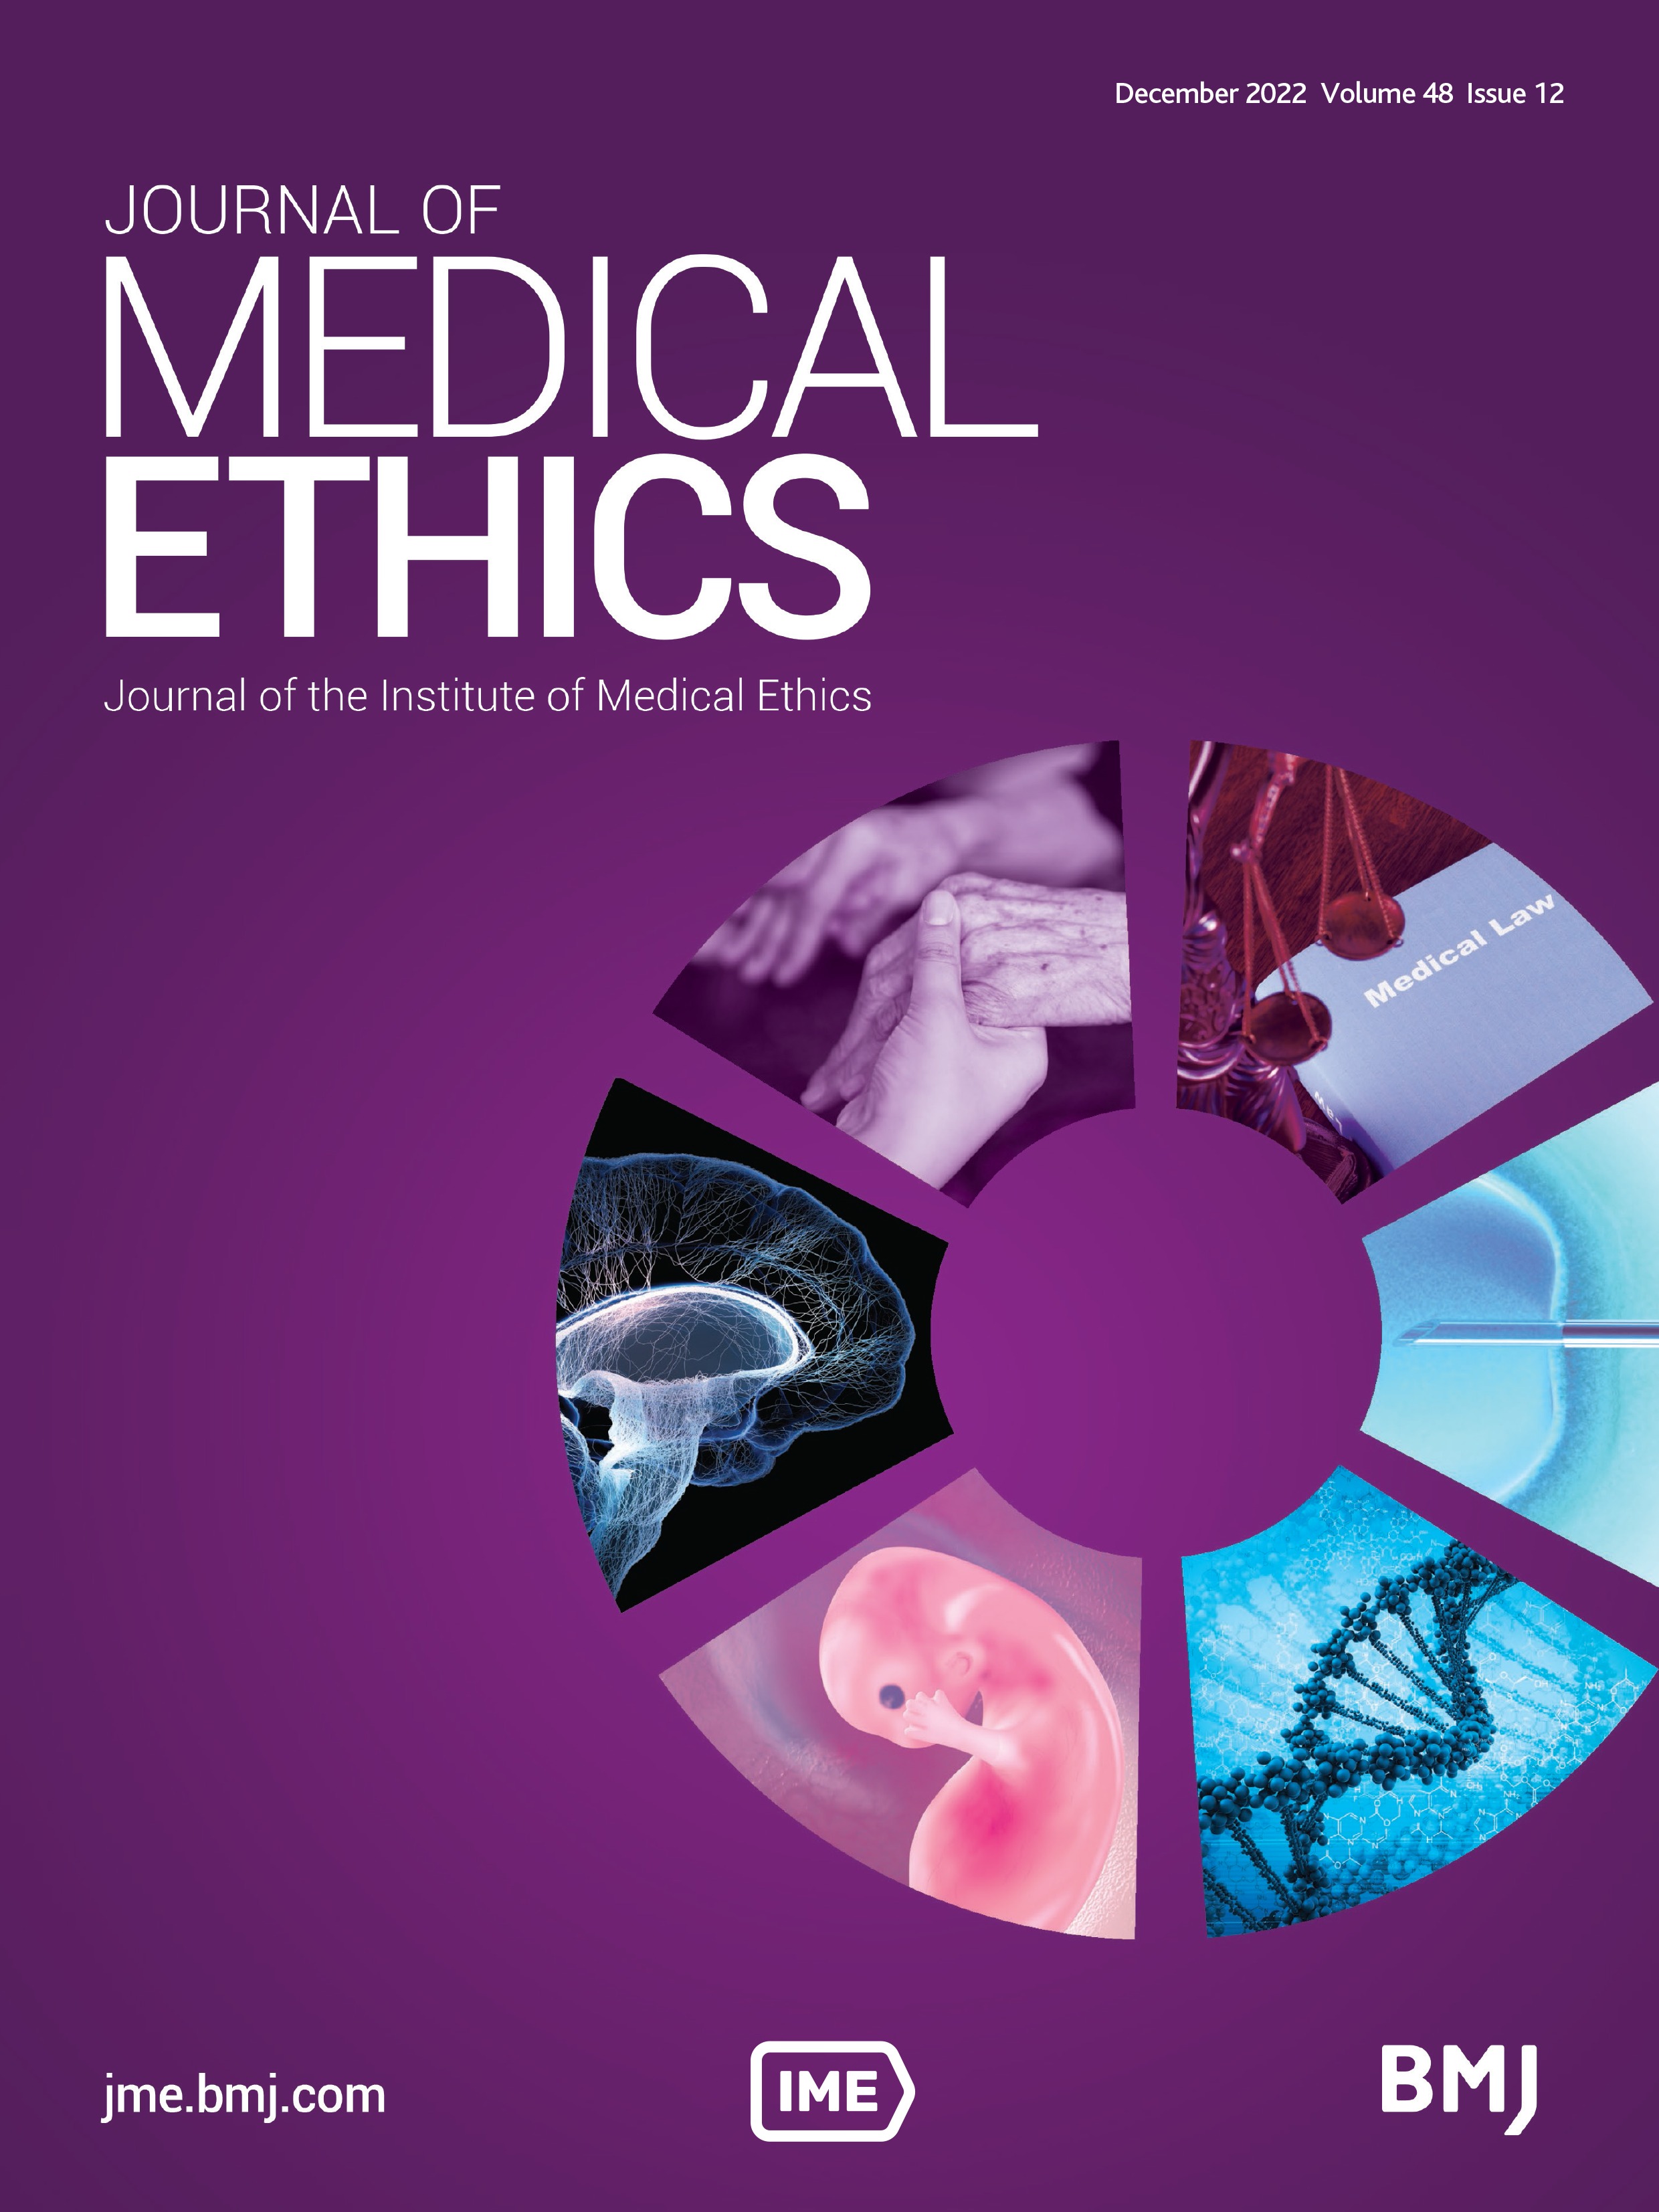 Fertility preservation for transgender children and young people in paediatric healthcare: a systematic review of ethical considerations